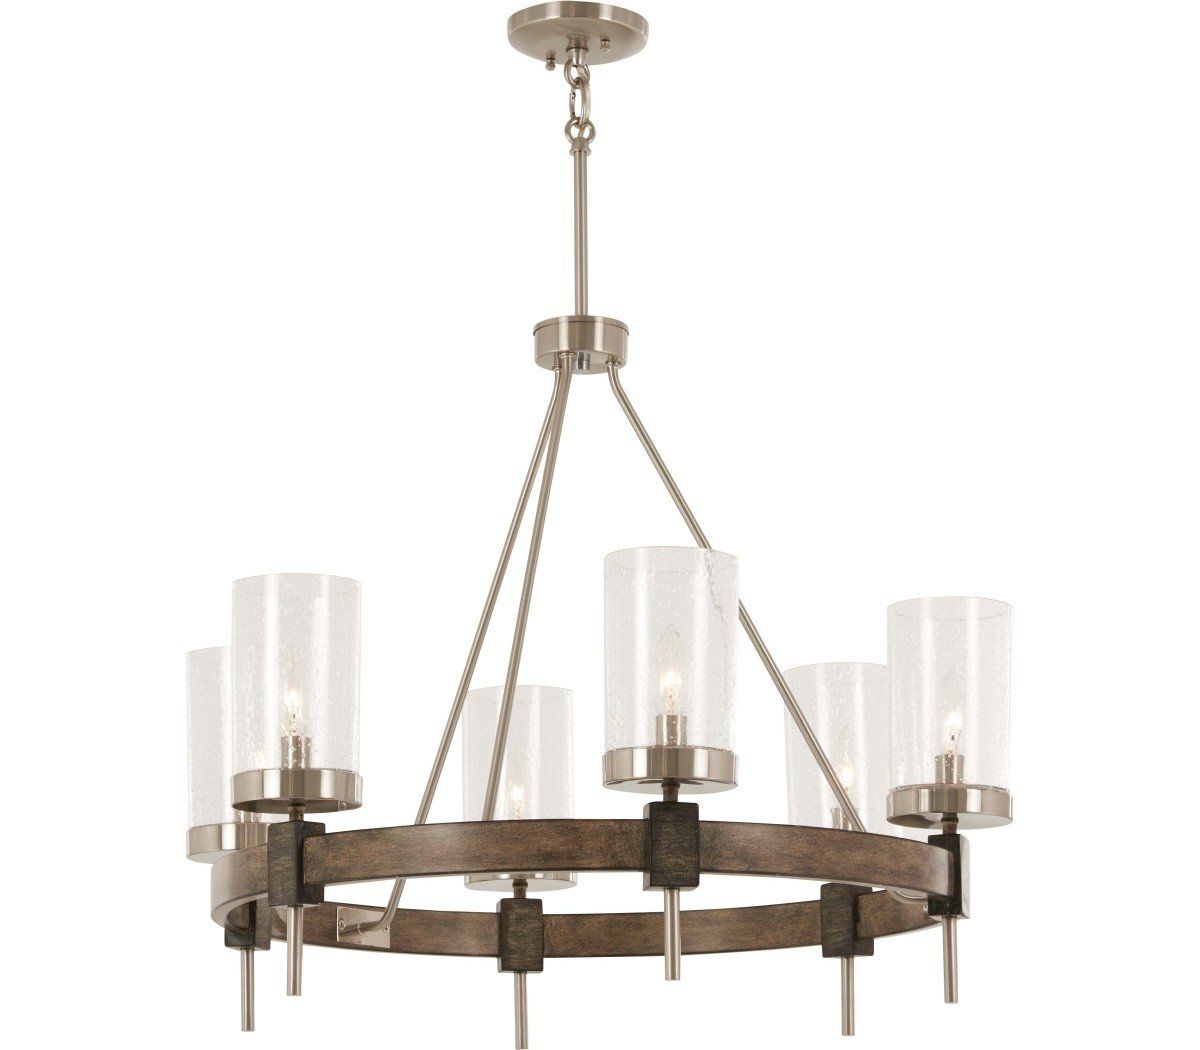 Minka Lavery 4638 106 Bridlewood 8 Light Stone Grey In Widely Used Stone Grey With Brushed Nickel Six Light Chandeliers (View 5 of 15)